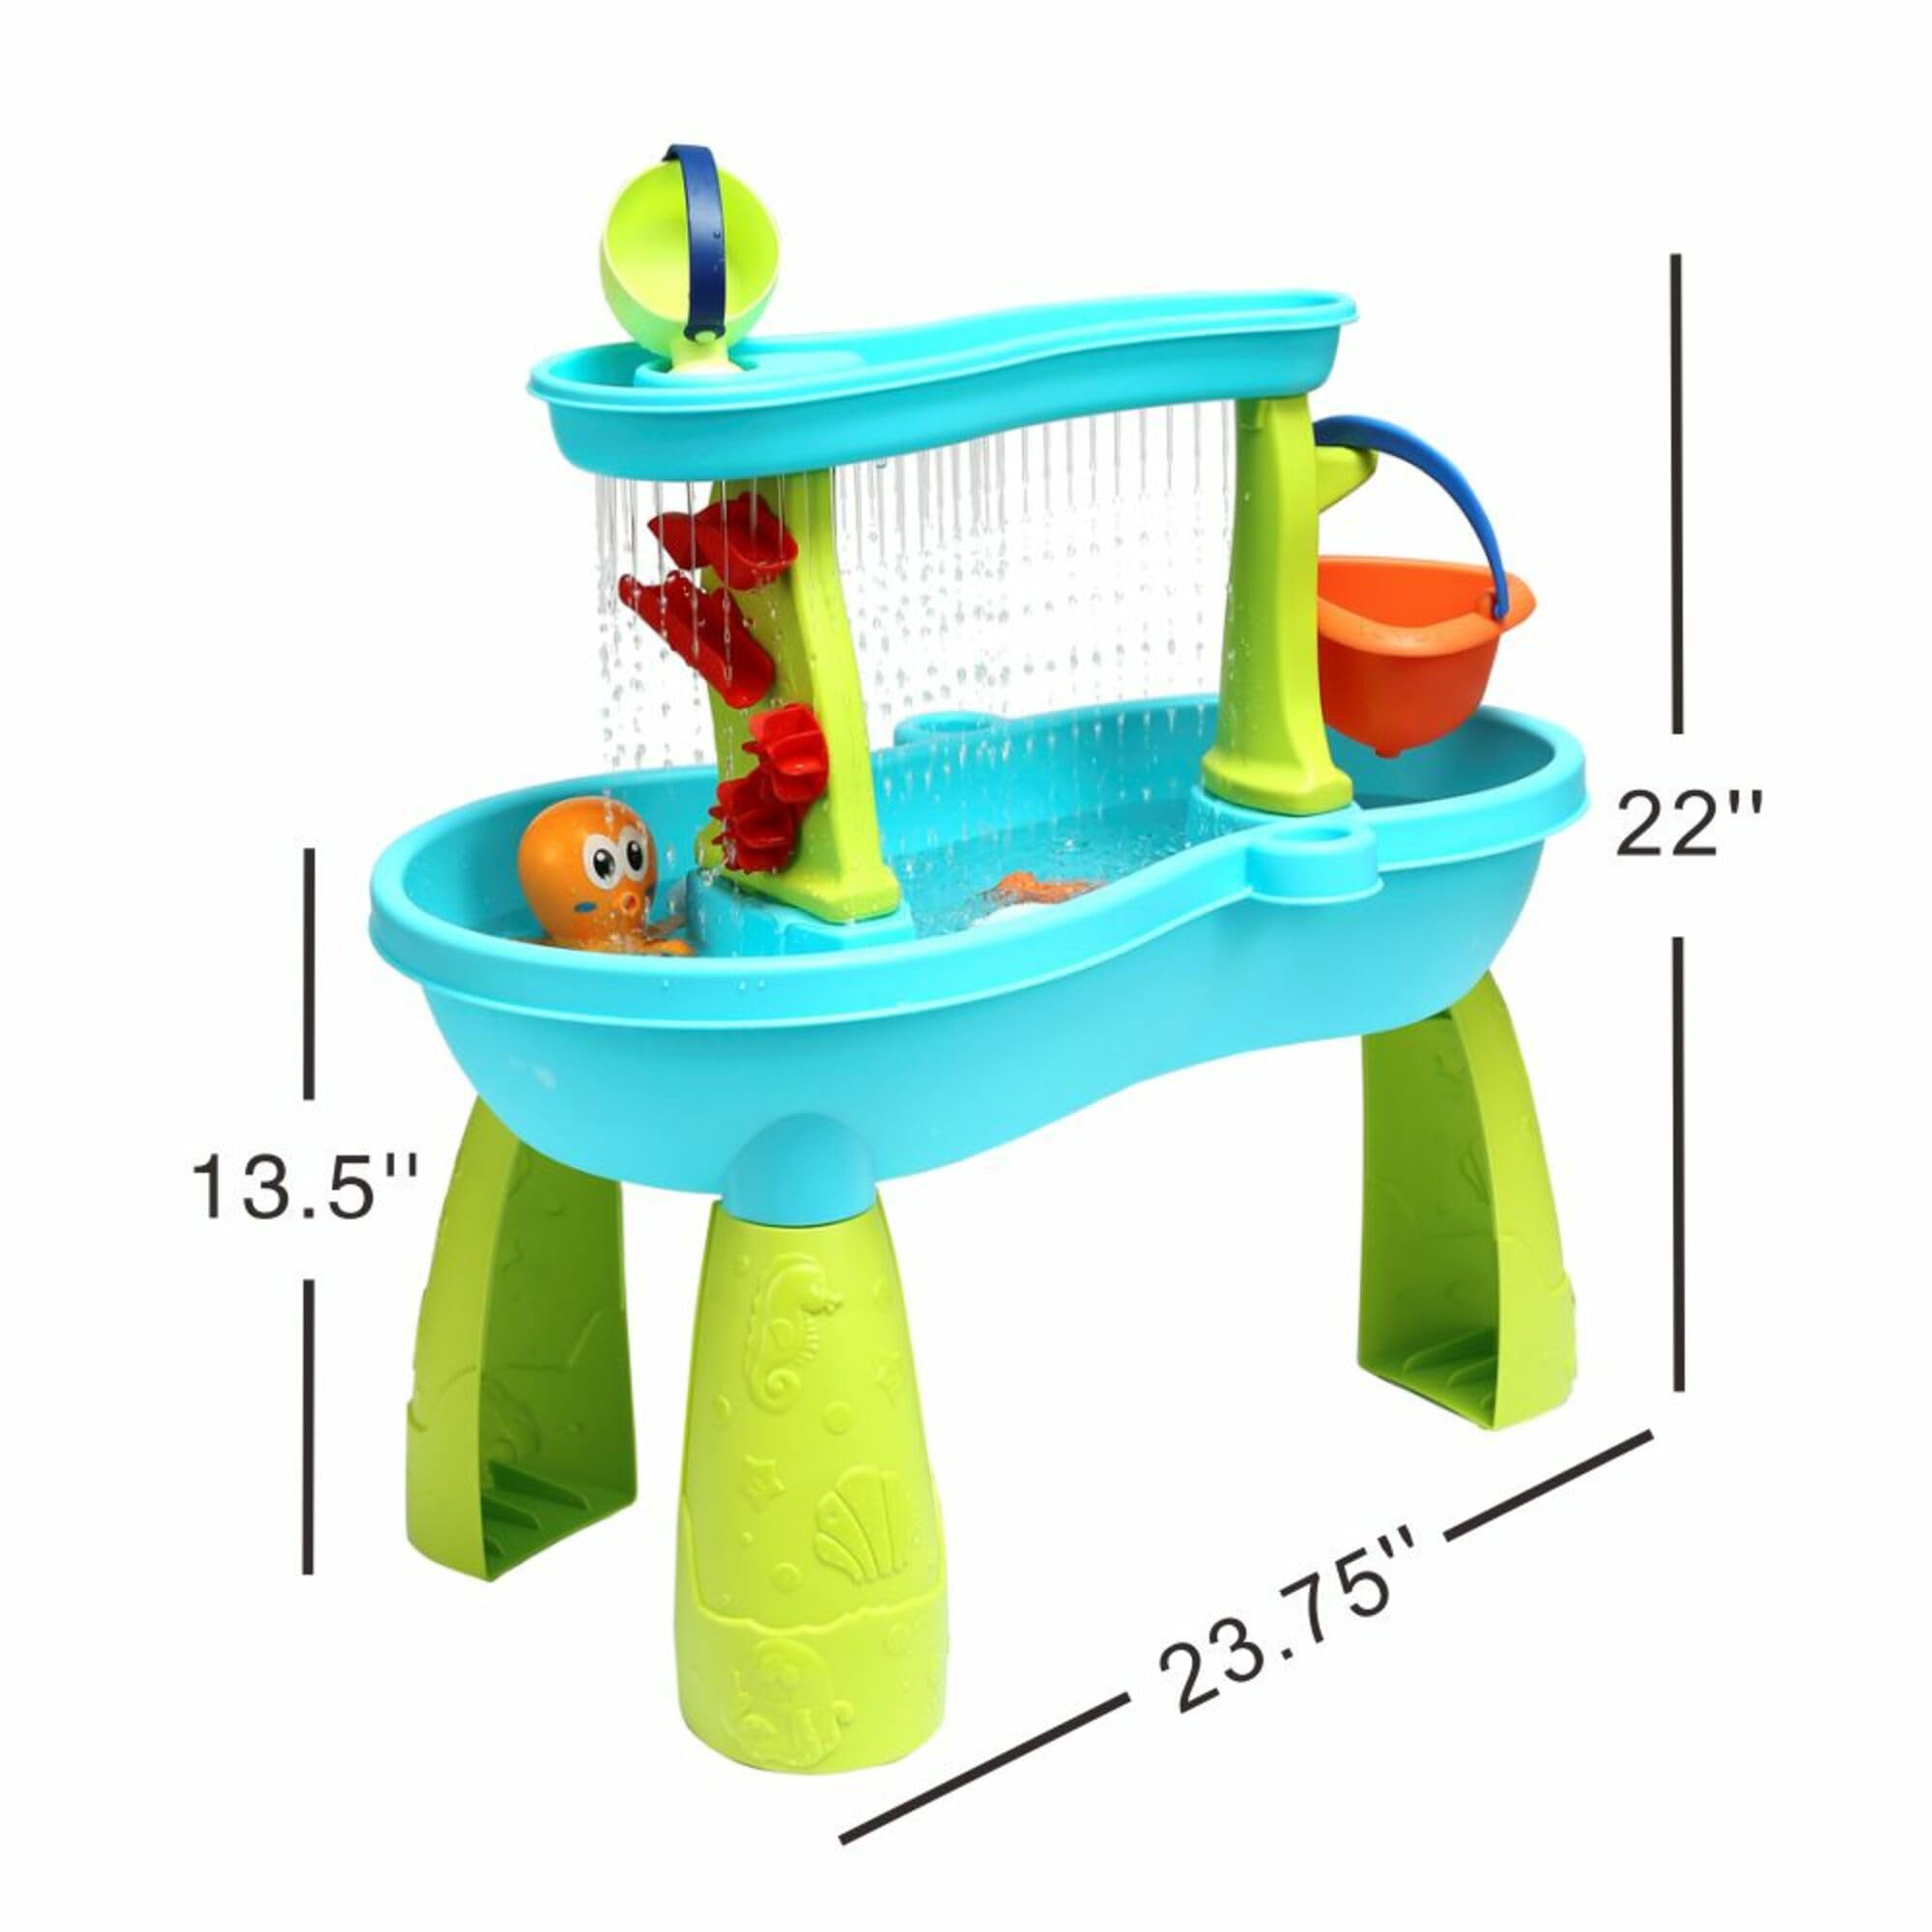 Trimate Toddler Sensory Sand and Water 2 Tier Table| Indoor & Outdoor Water and Sand Summer Beach Toys and Play Table for Kids | Backyard Sand and Water Table for 3-5 Year Old Boys and Girls